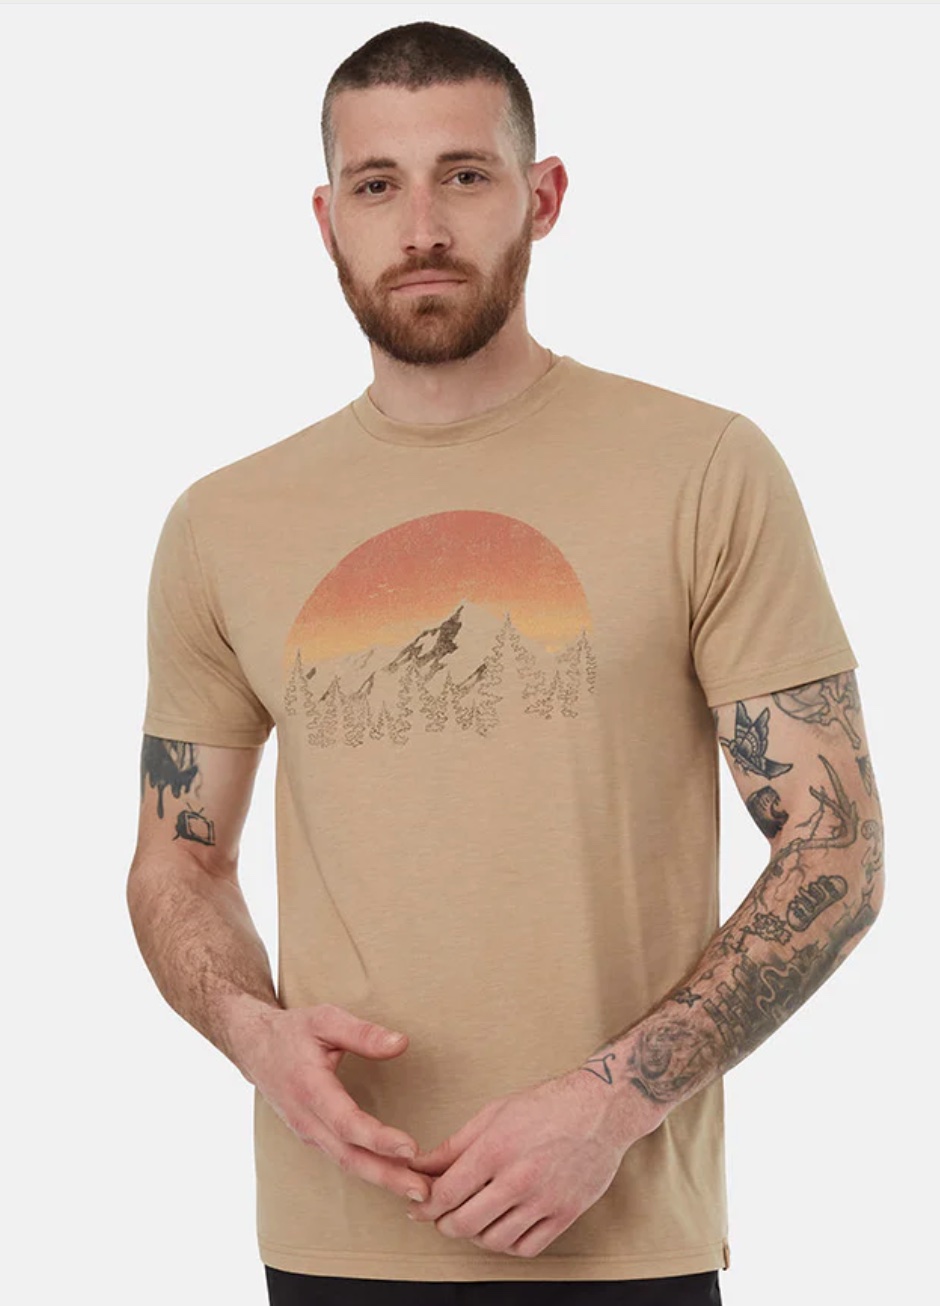 A model in a graphic tan tee shirt.